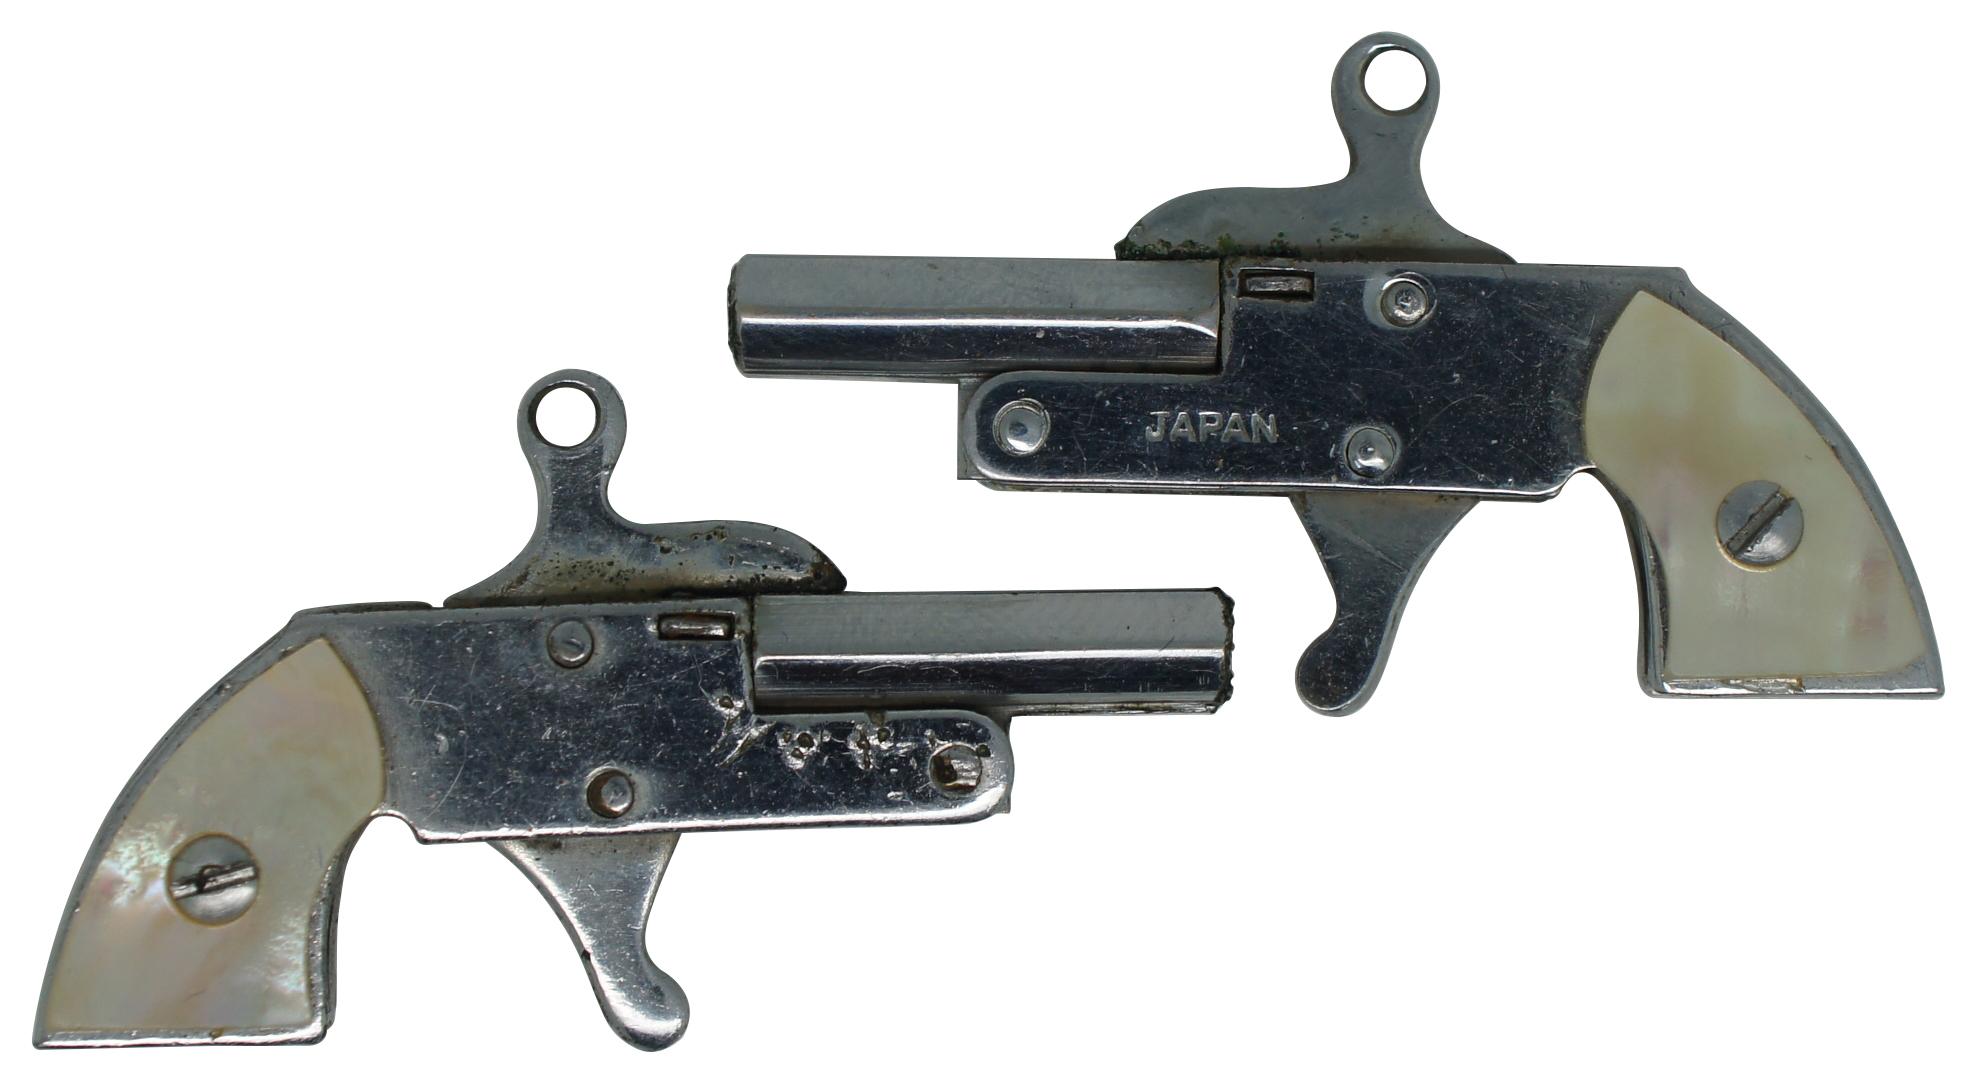 Vintage miniature pin fire cap gun pair with mother of pearl on the handles, made in Japan with small ring on top of the barrel for use as a key chain or watch fob. Includes set of 2mm blank cartridges and ram rod.
 